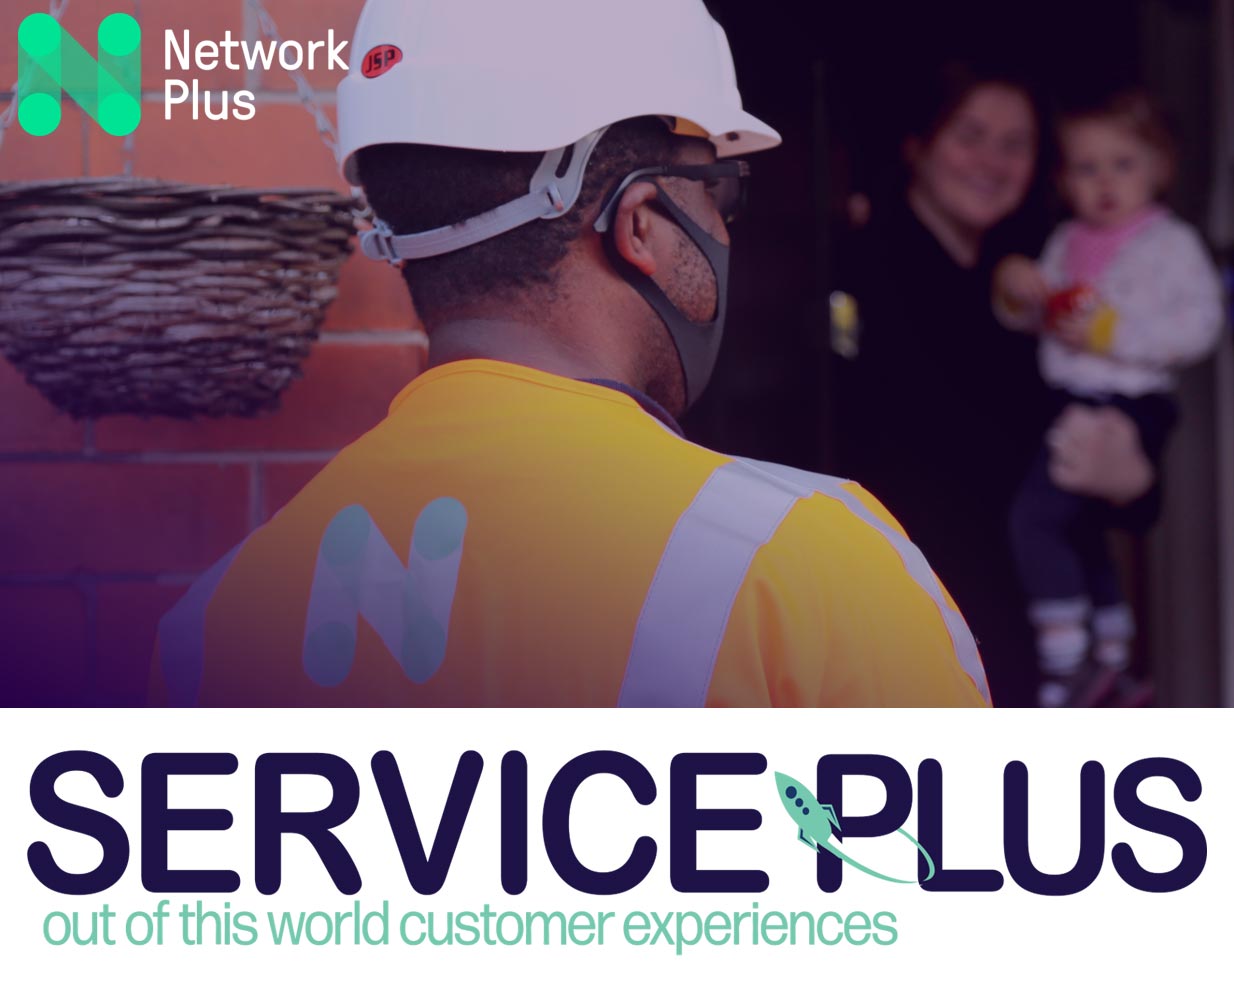 Network Plus launches Service Plus – a company-wide focus on customer service excellence